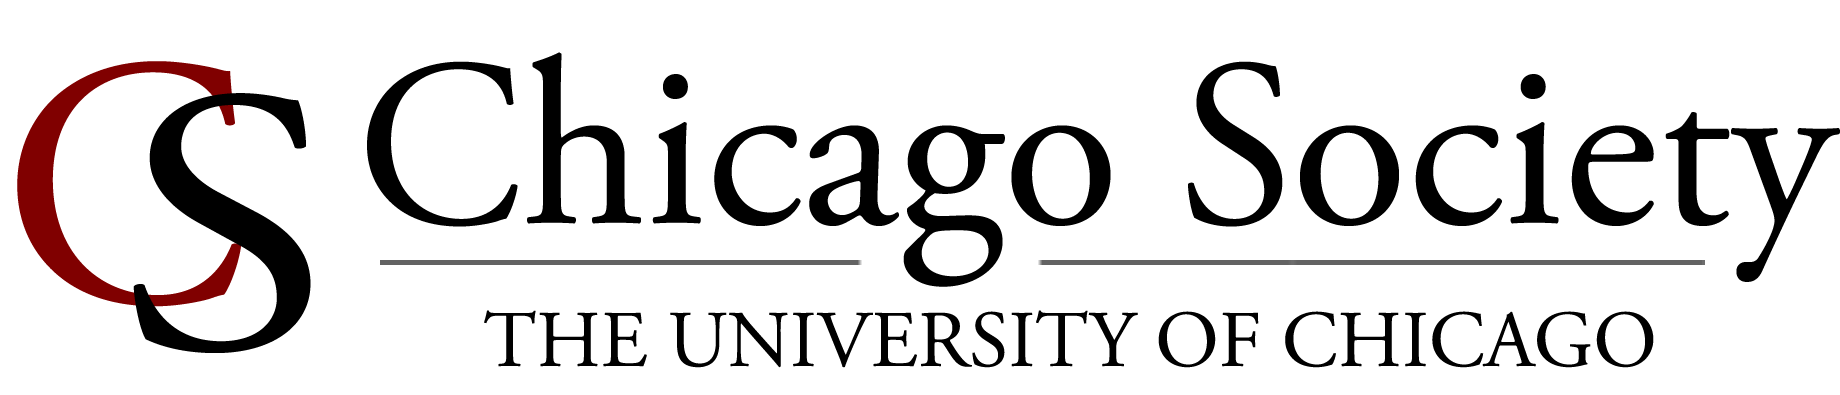 Chicago Society at the University of Chicago